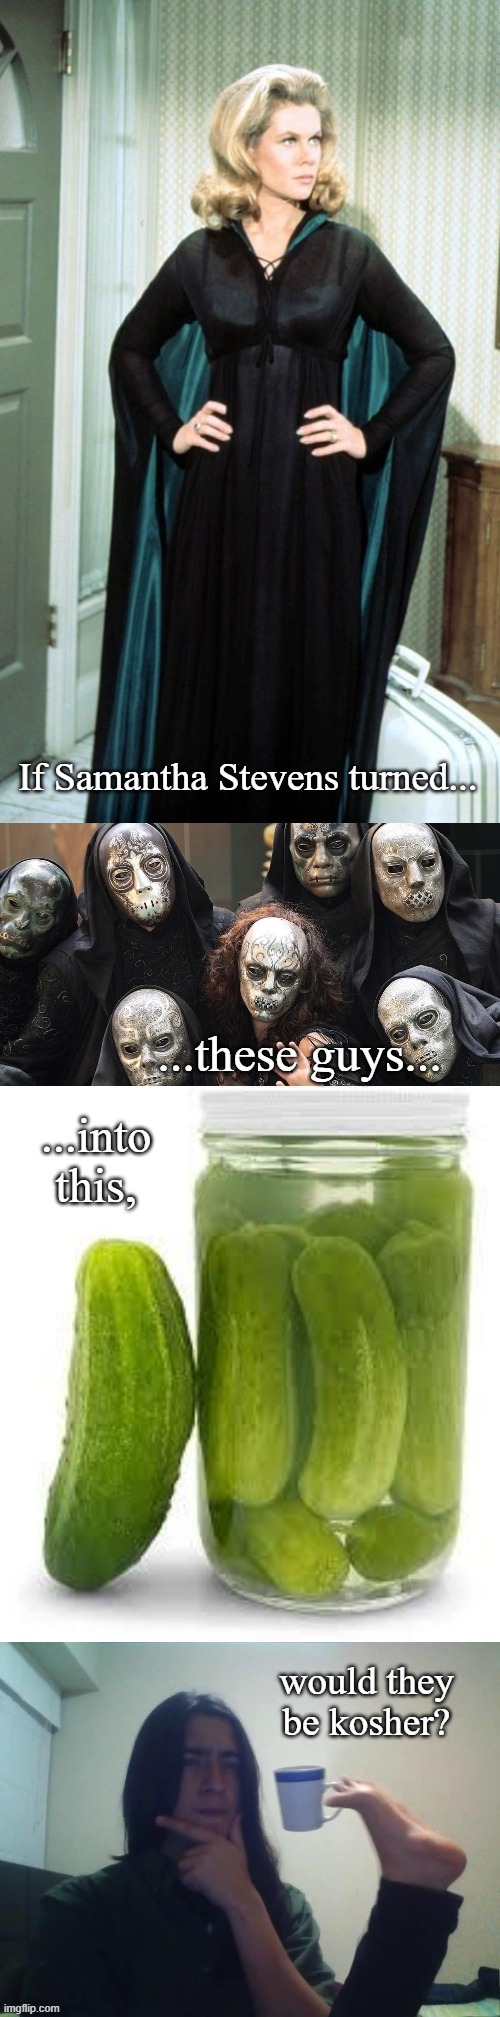 A Pickle Question | image tagged in bewitched,death eaters,funny,memes,jar o pickles,hmmmm | made w/ Imgflip meme maker